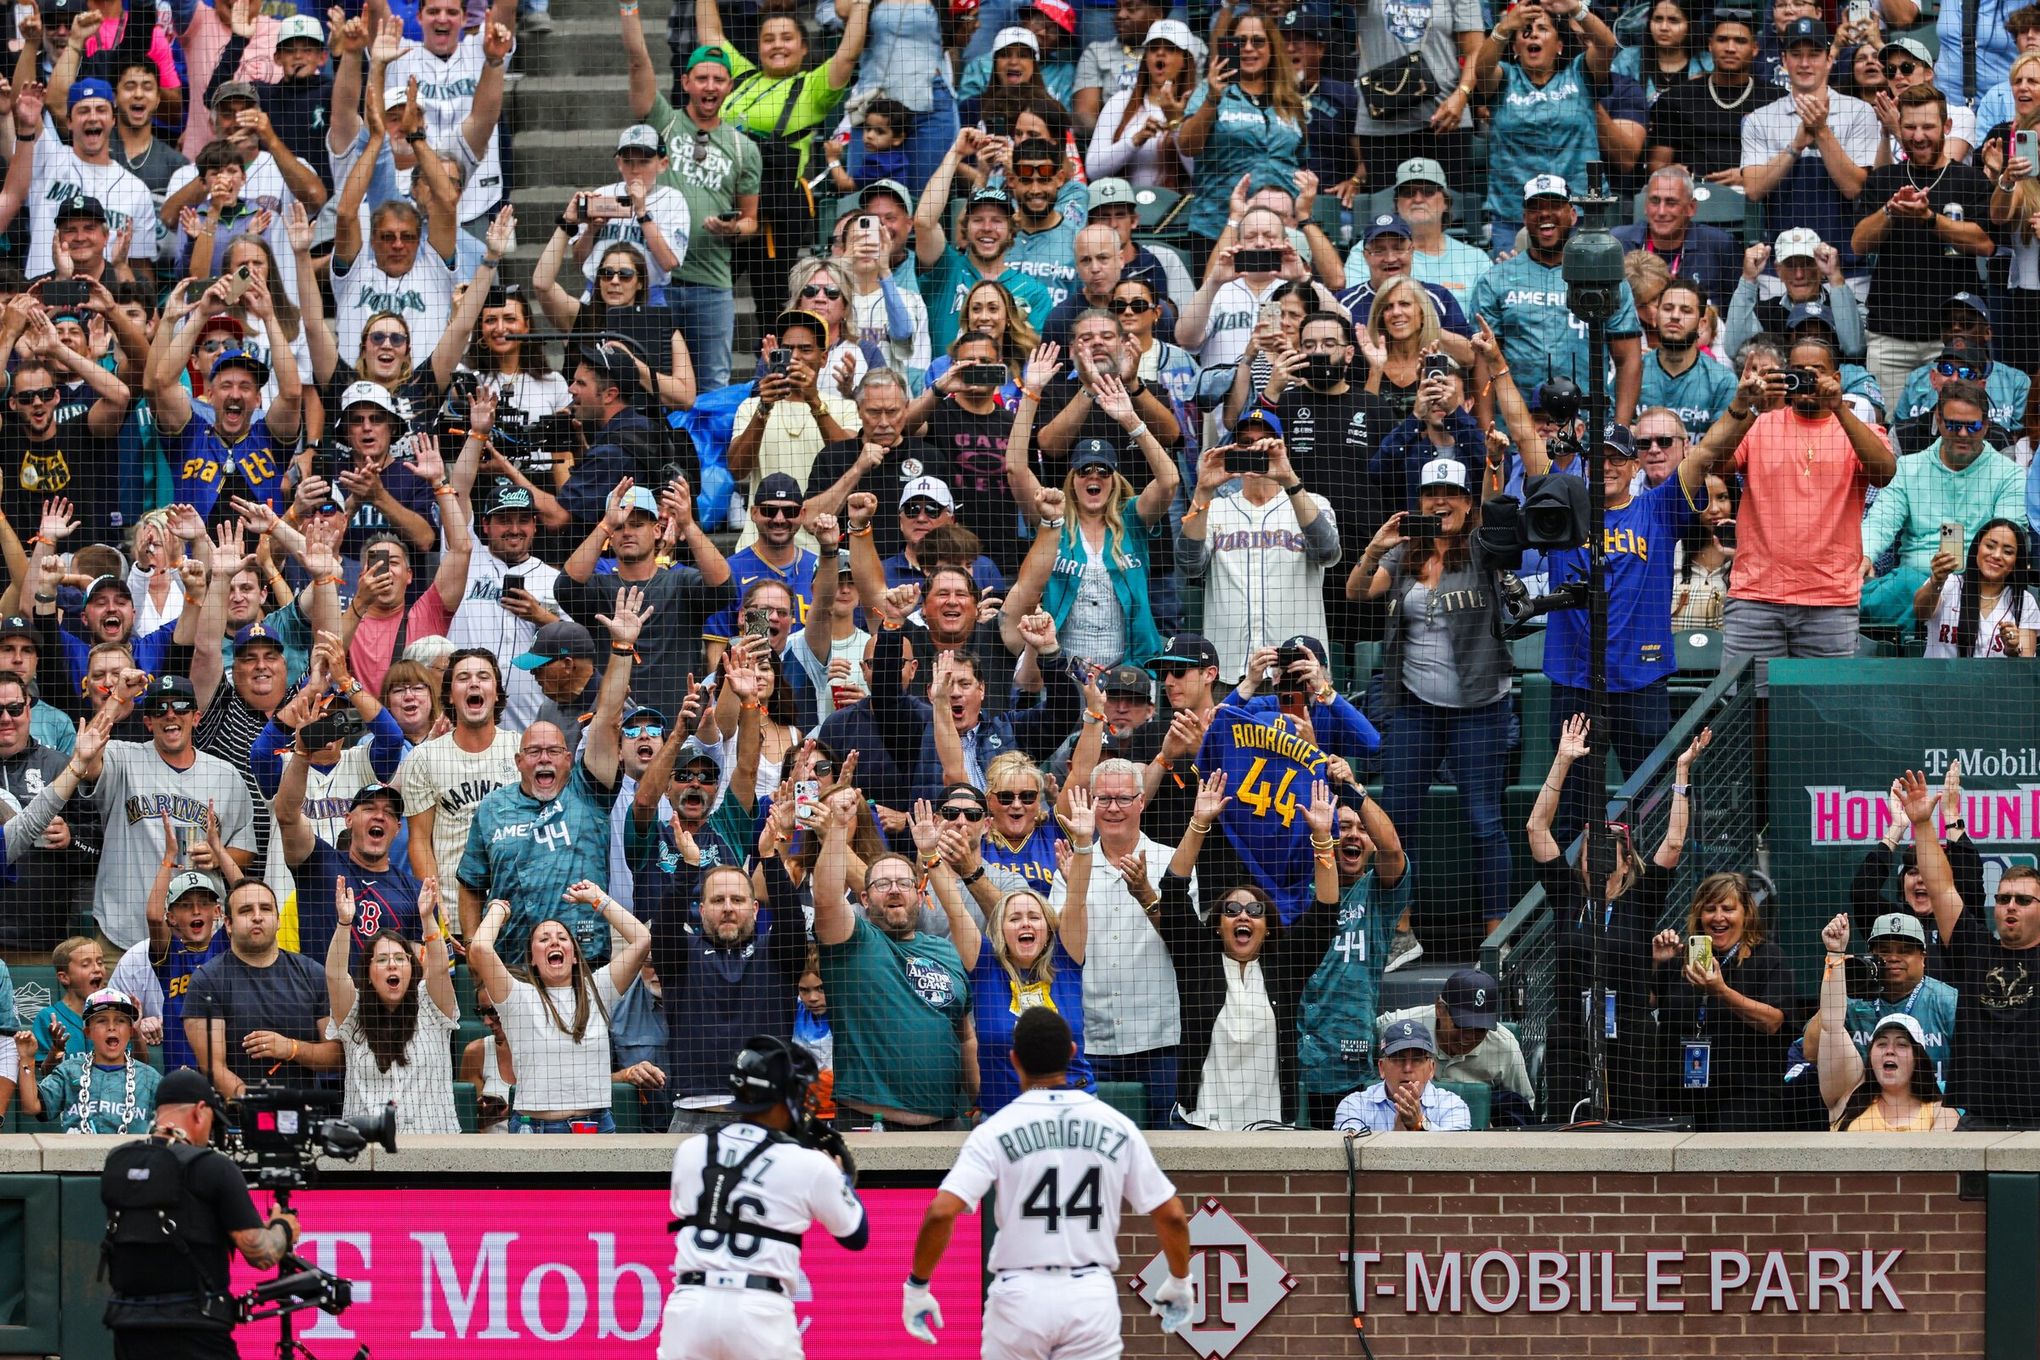 MLB All-Star Metrics: Baseball Fans Turn Out For Record-Setting